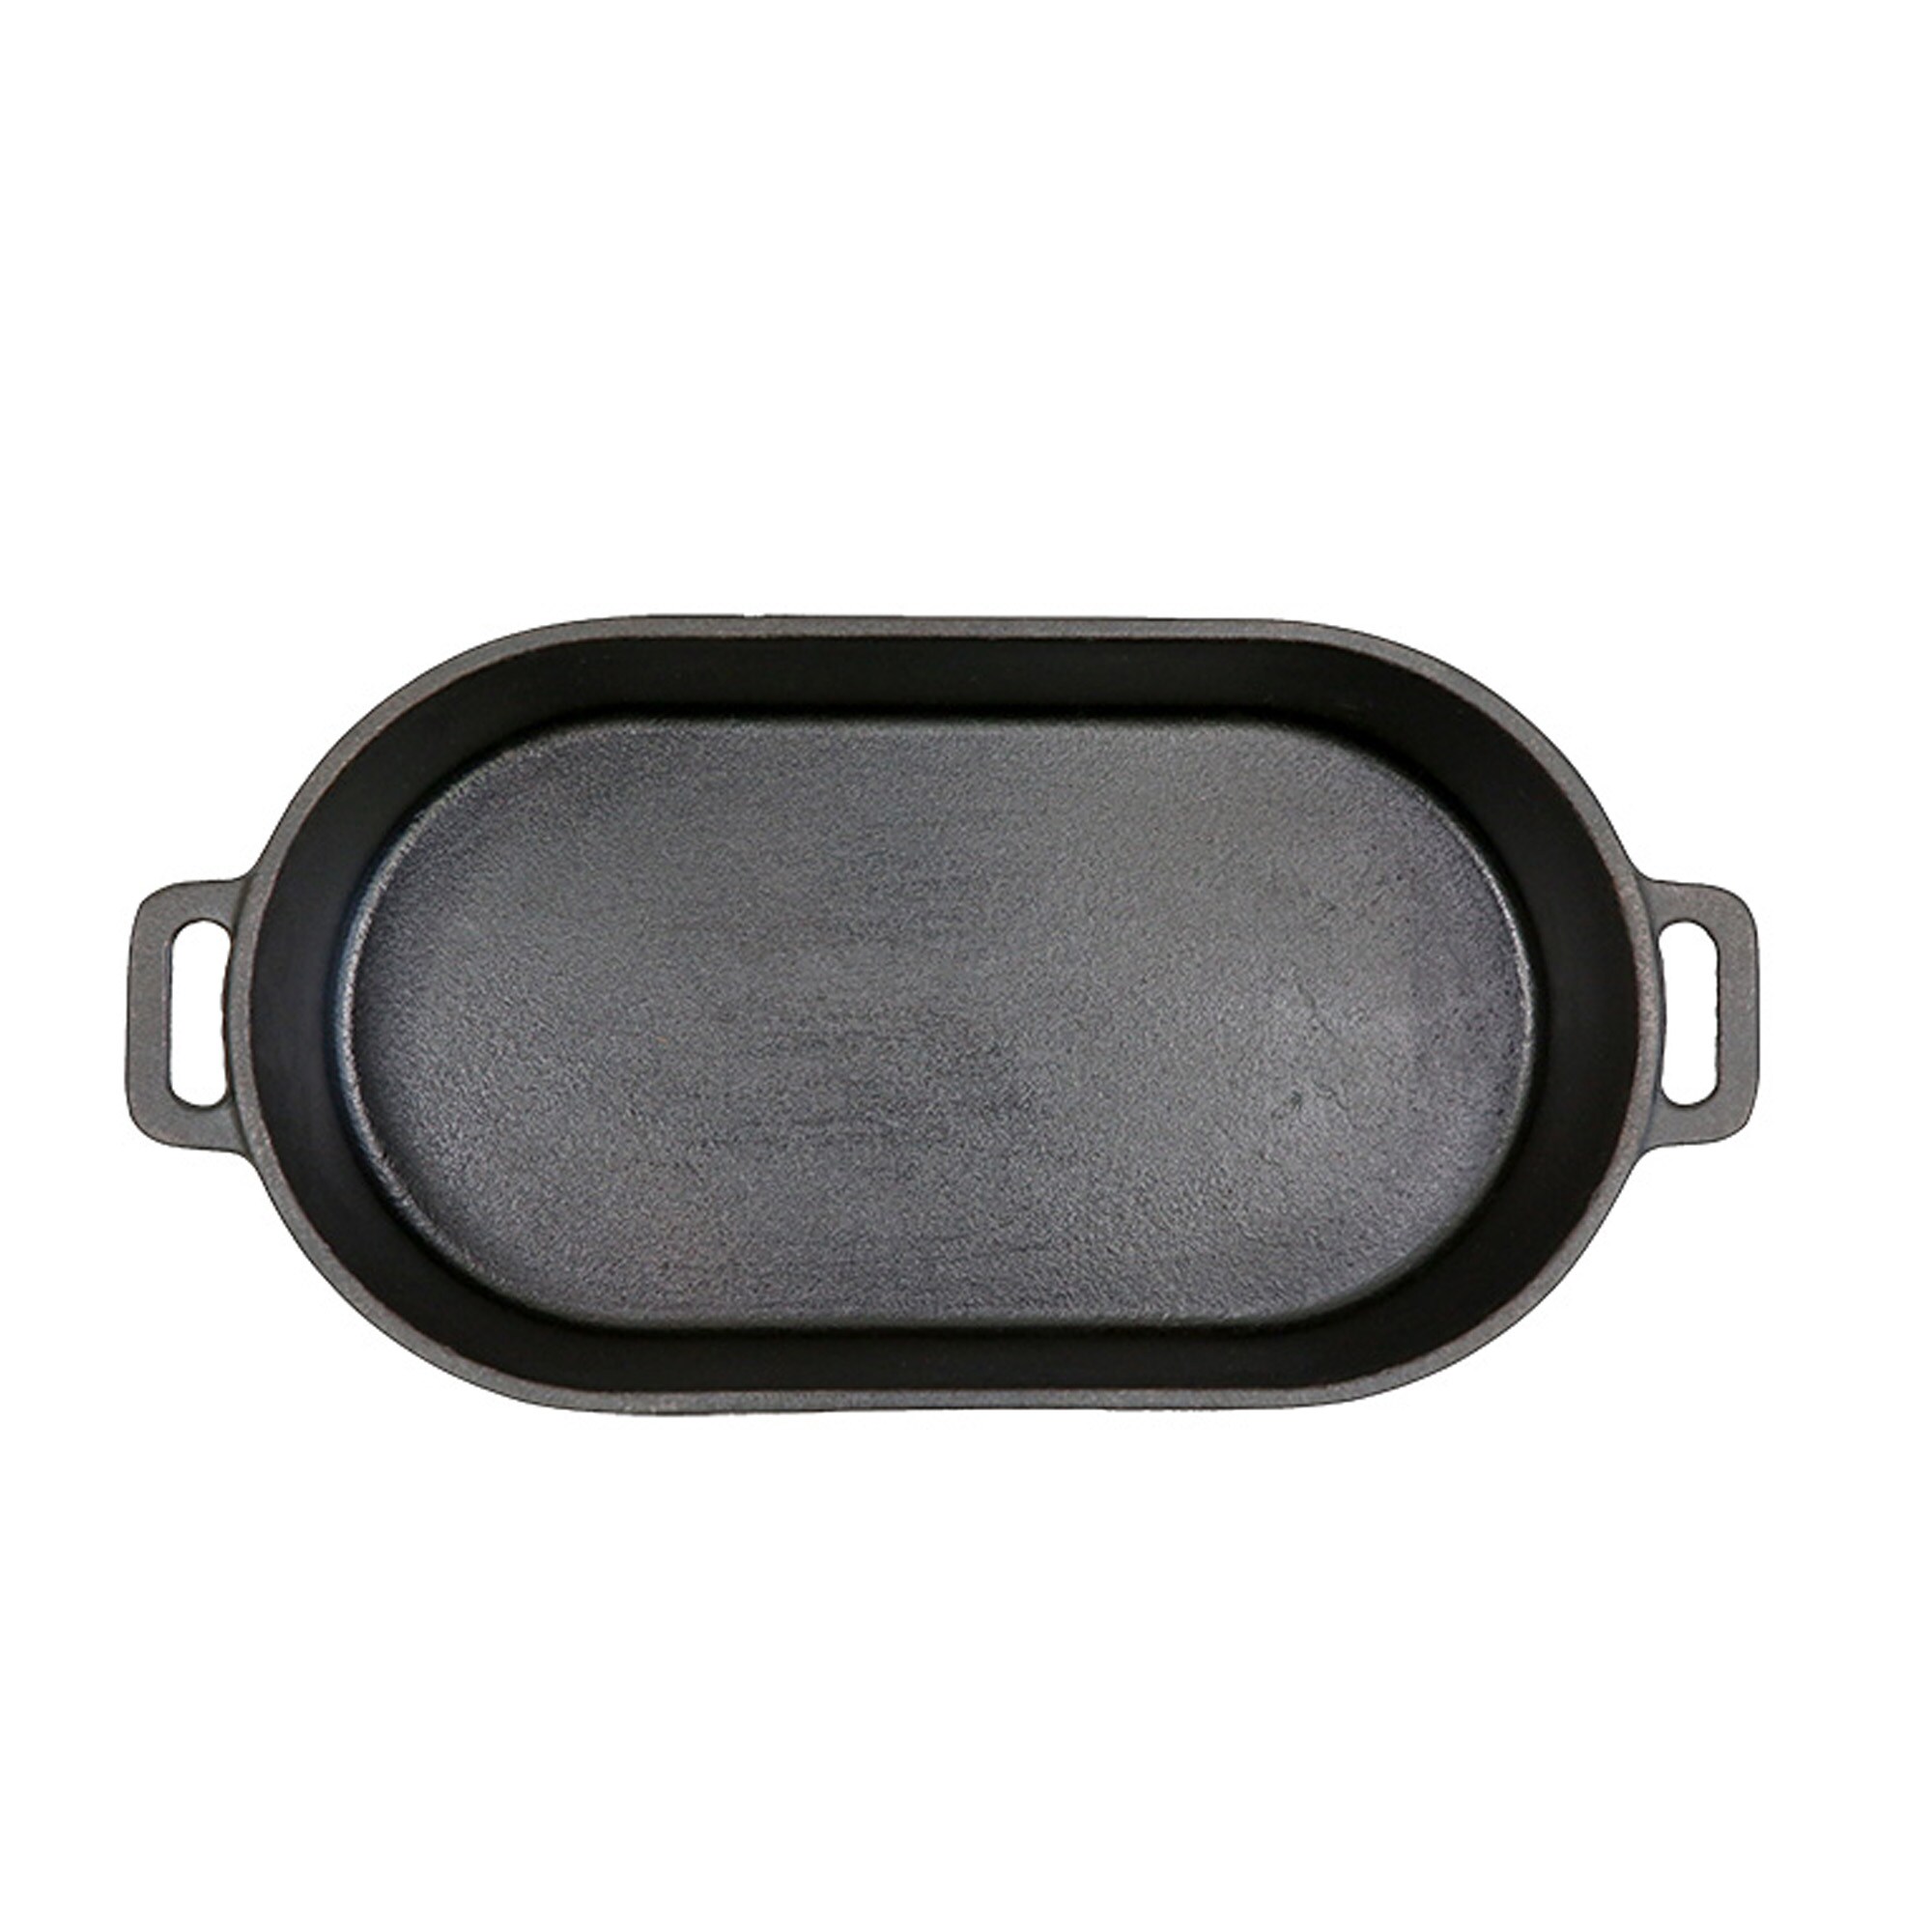 River 8130000223 Grill Pan Black for sale online 